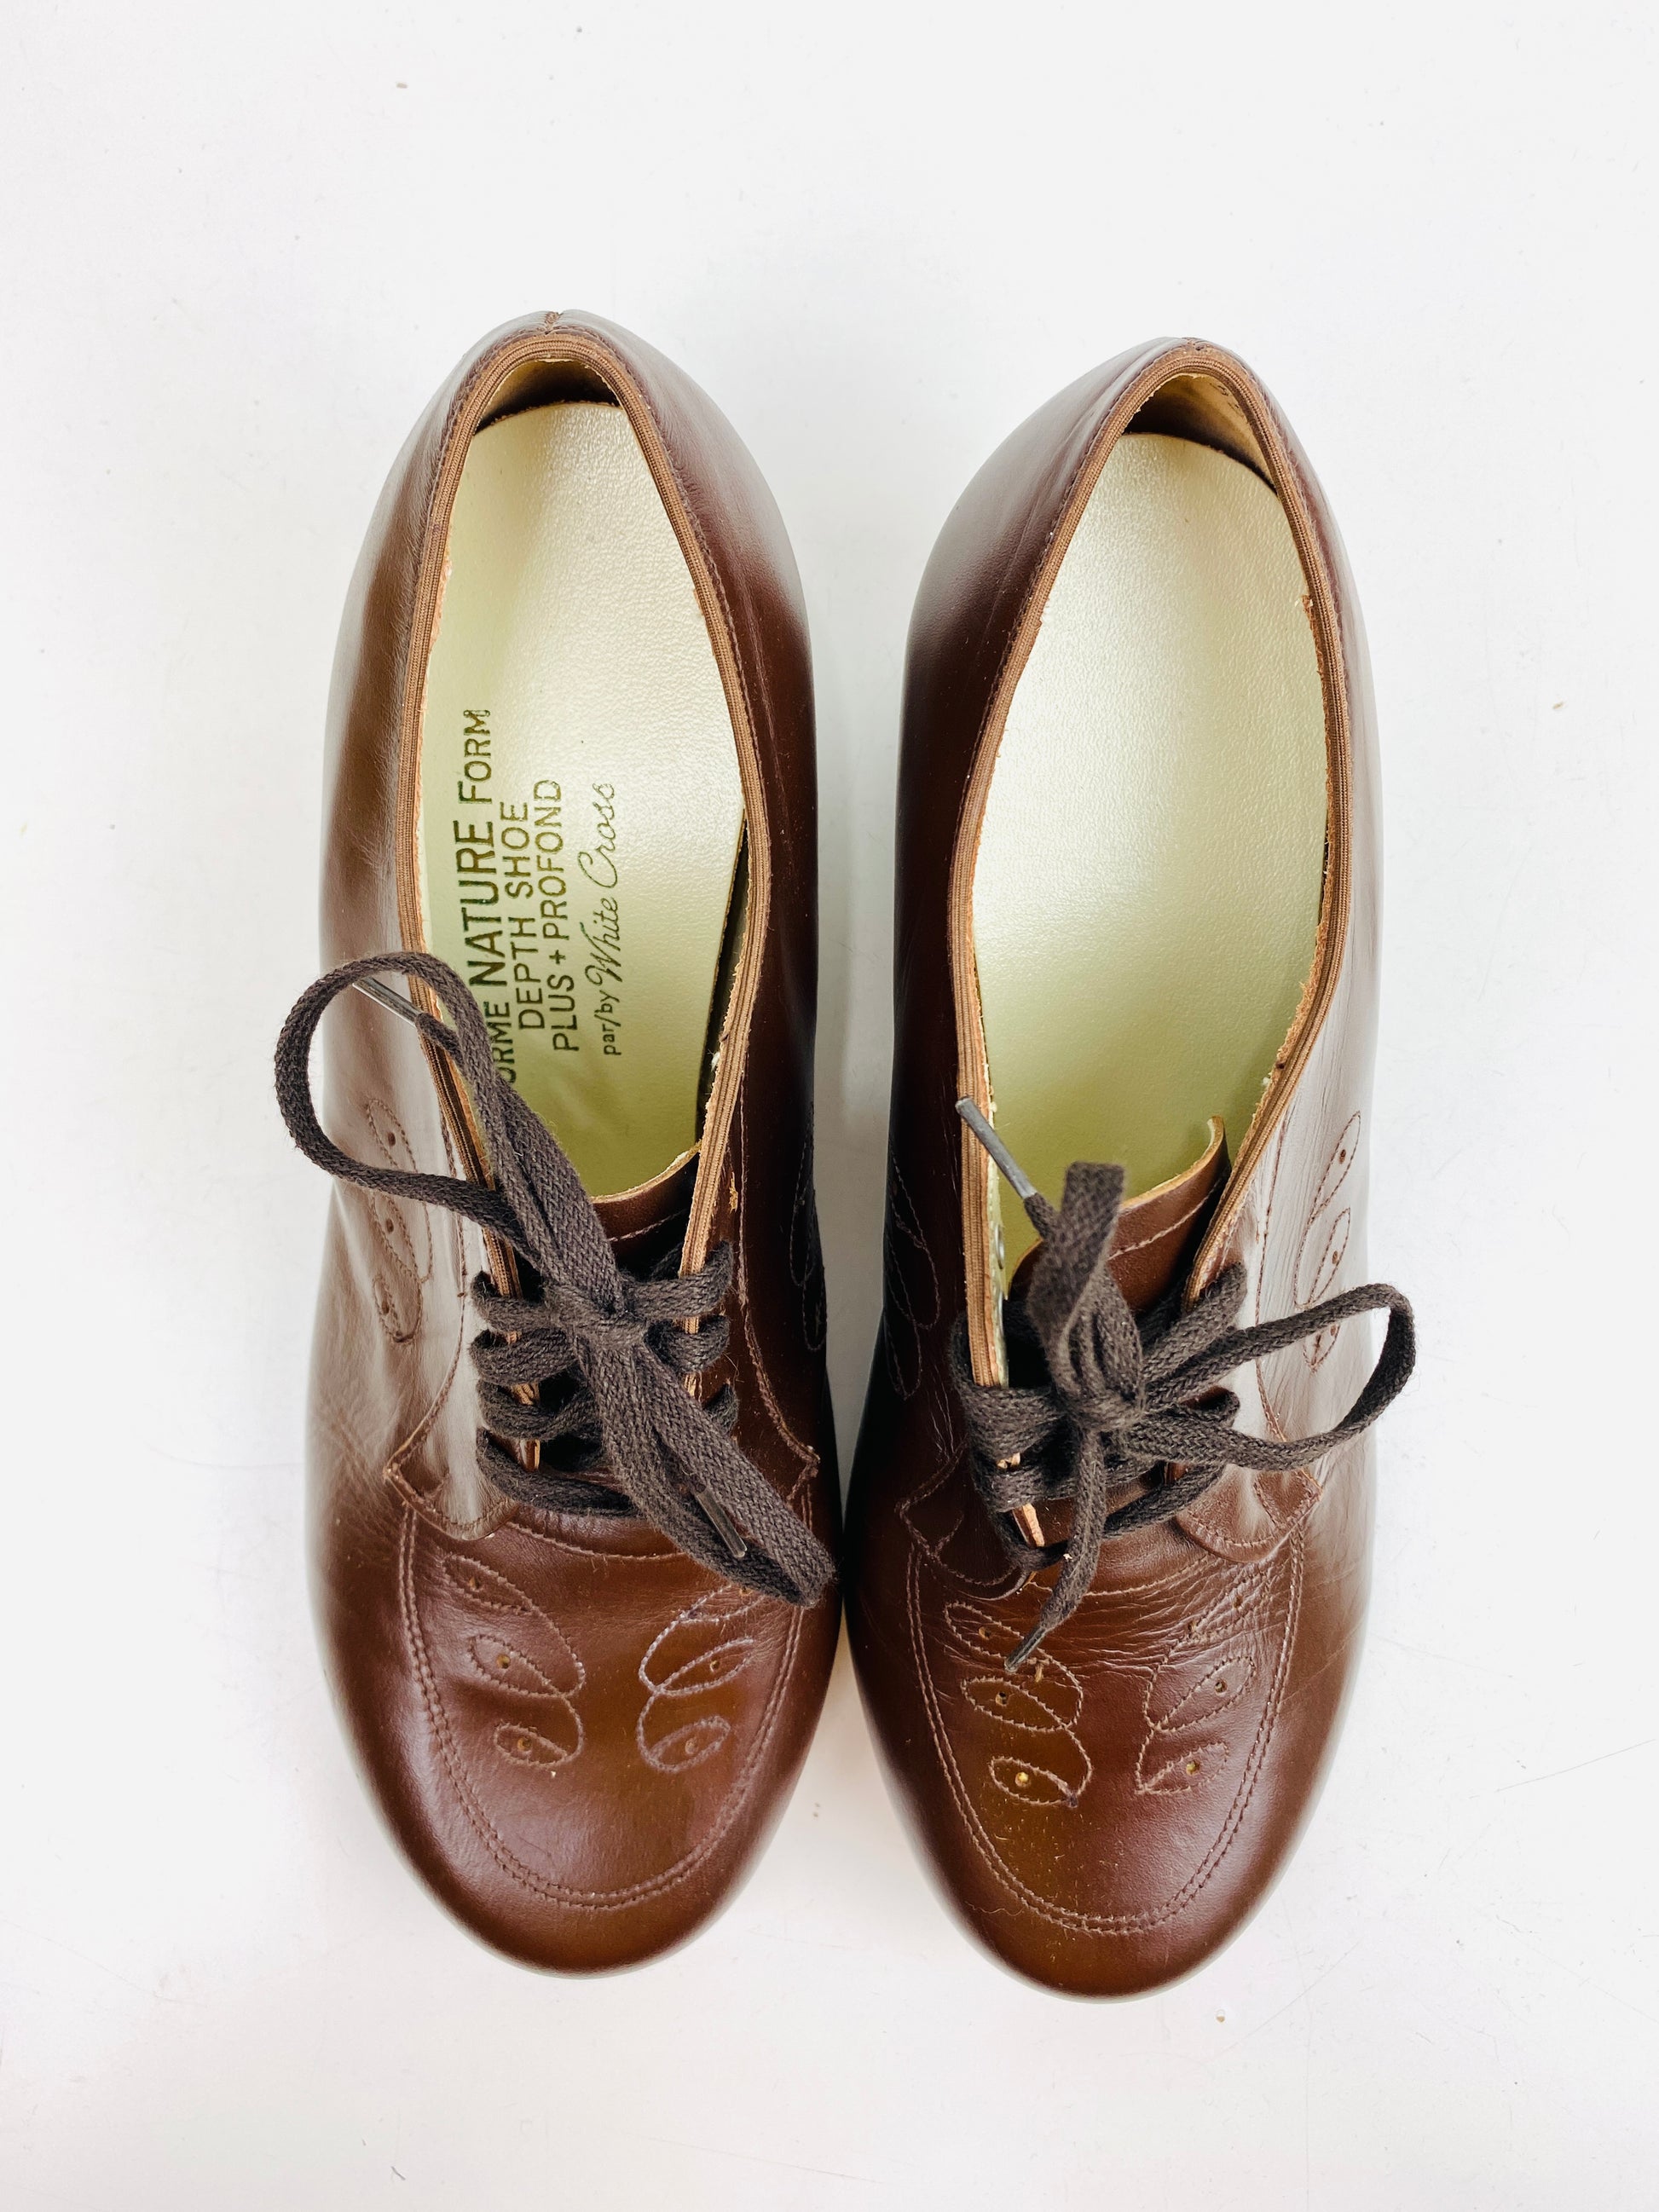 Vintage Deadstock Shoes, Women's 1980s Brown Leather Oxford's, Cuban Heels, NOS